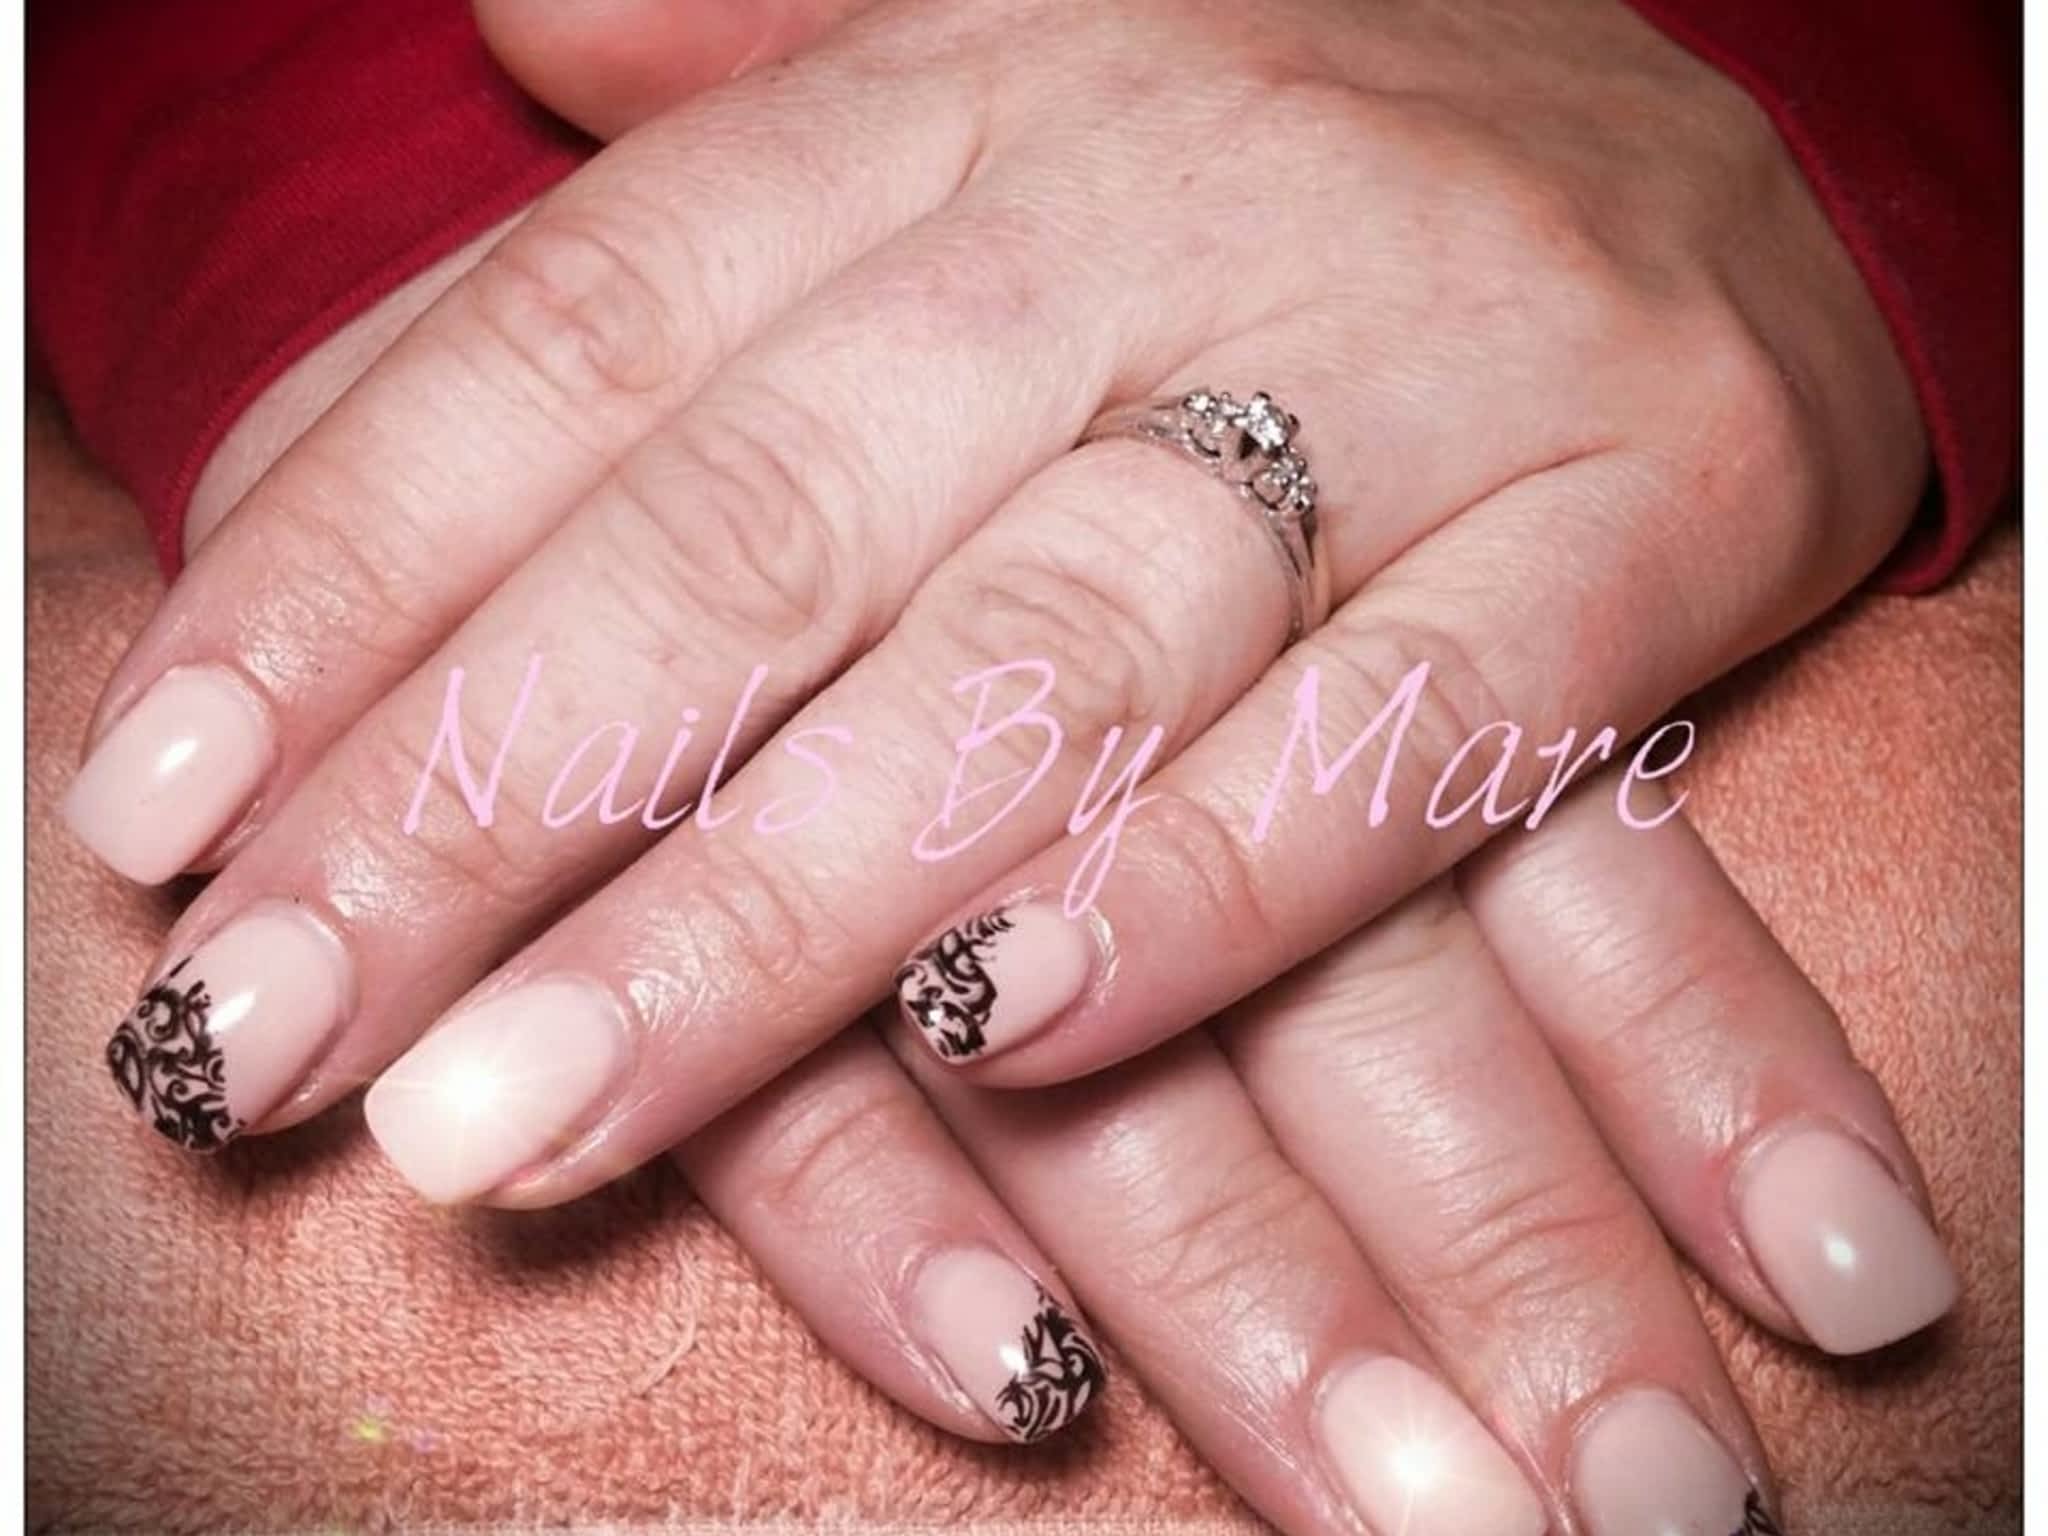 photo Nails By Mare